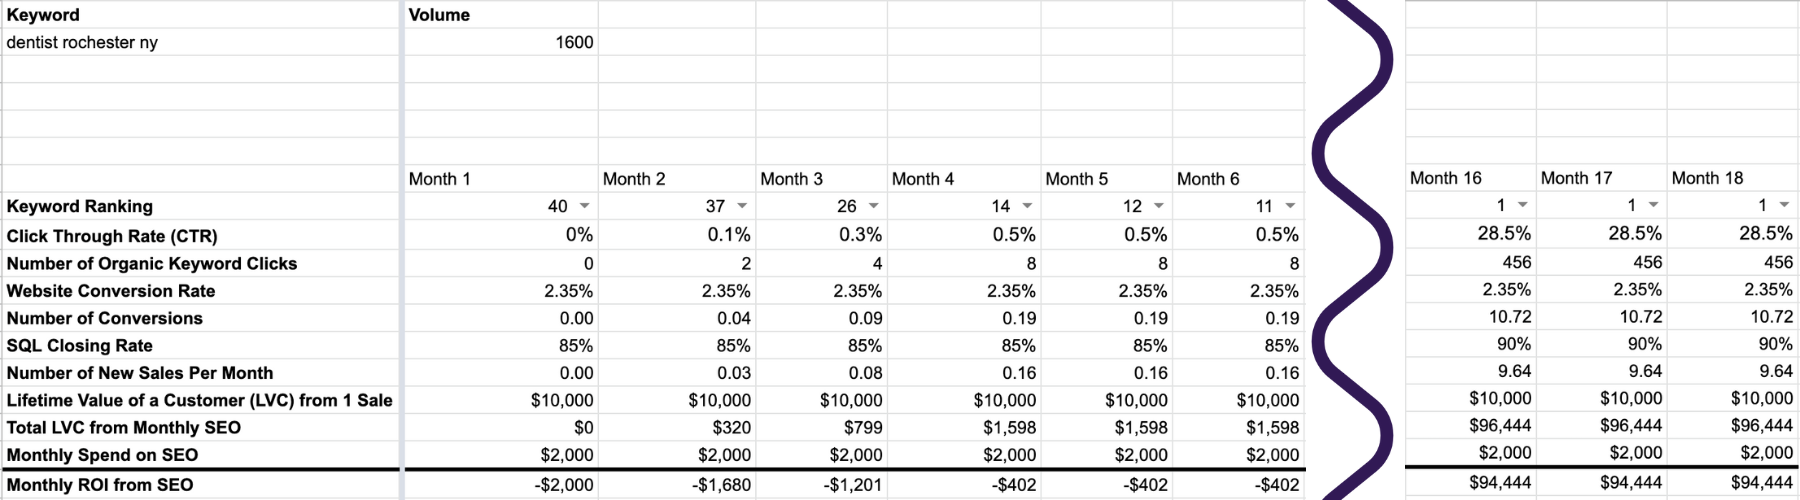 How To Calculate The ROI Of SEO For Your Marketing Strategy